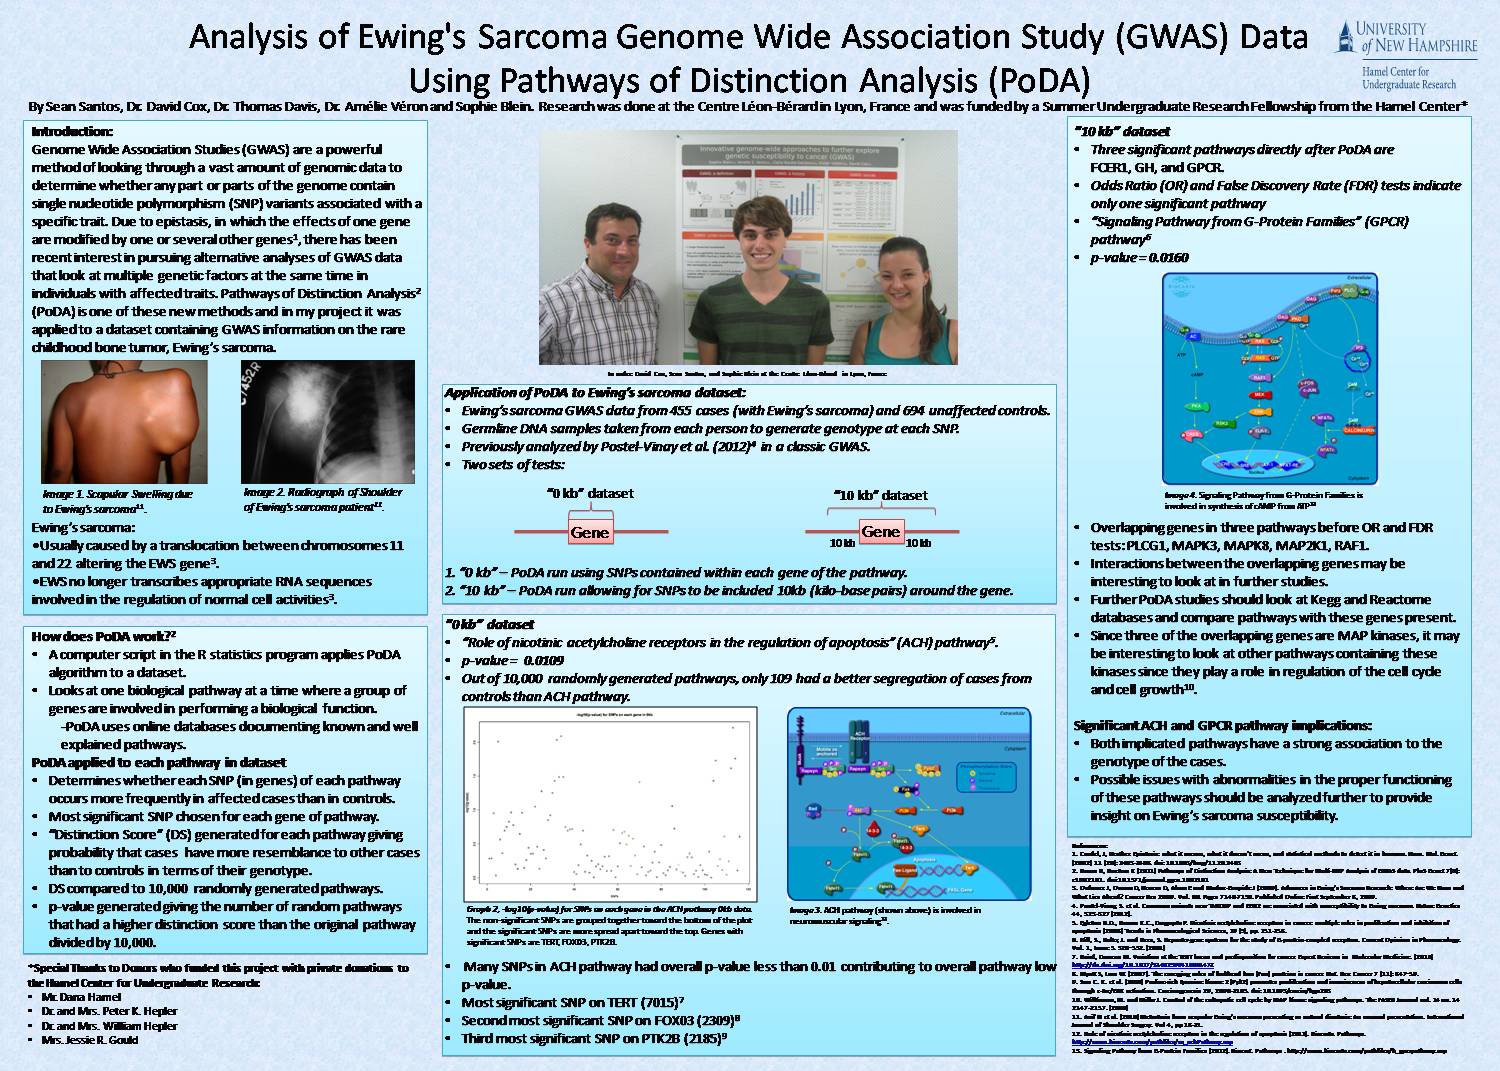 Analysis Of Ewing's Sarcoma Genome Wide Association Study Data Using Pathways Of Distinction Analysis by ssantos18